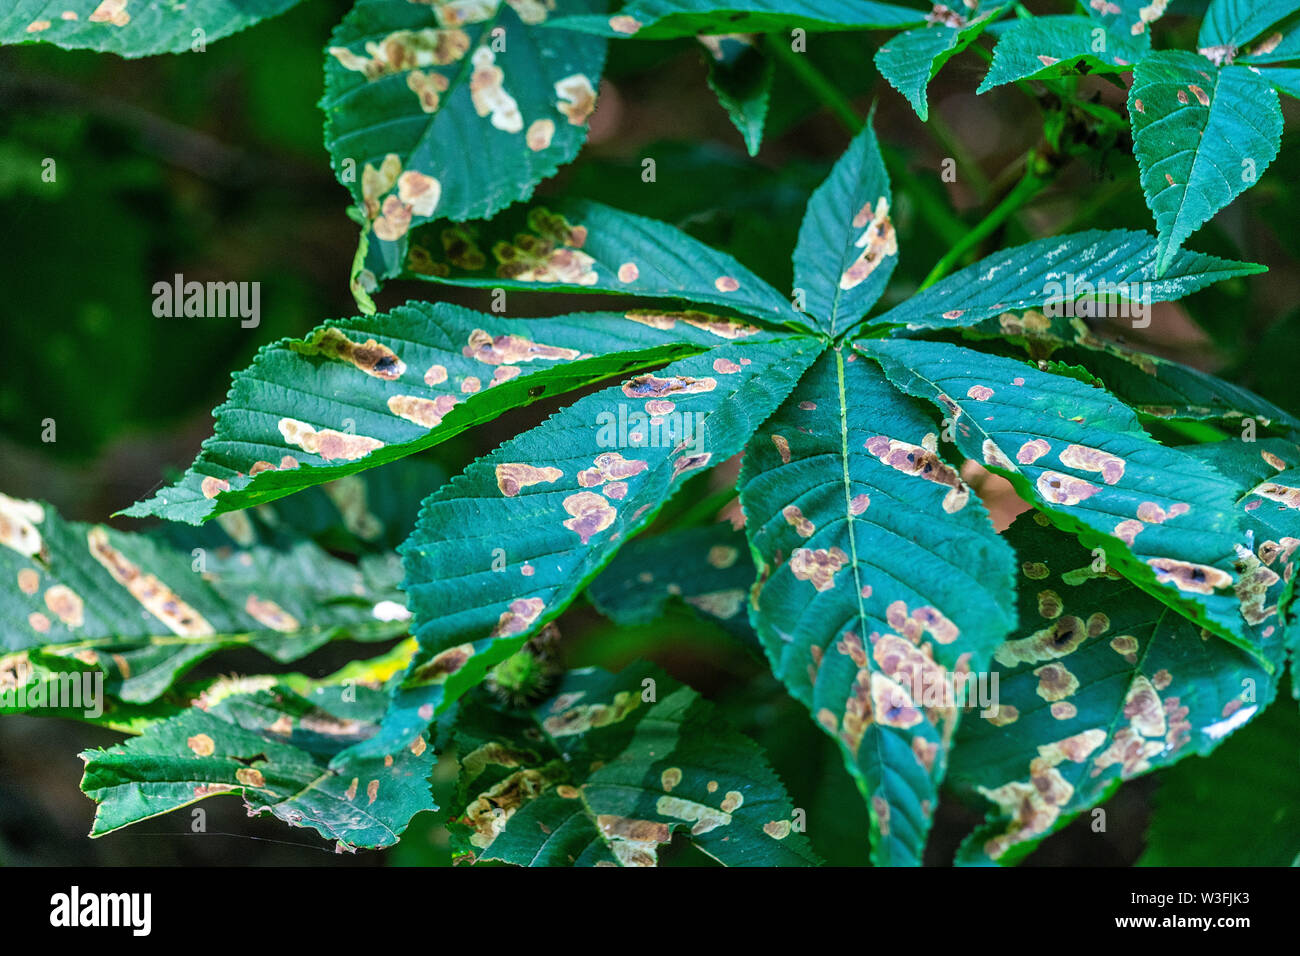 Horse chestnut tree leaves, otherwise known as the conker tree. The leaves are diseased with a fungus which causes blotches to appear. Stock Photo